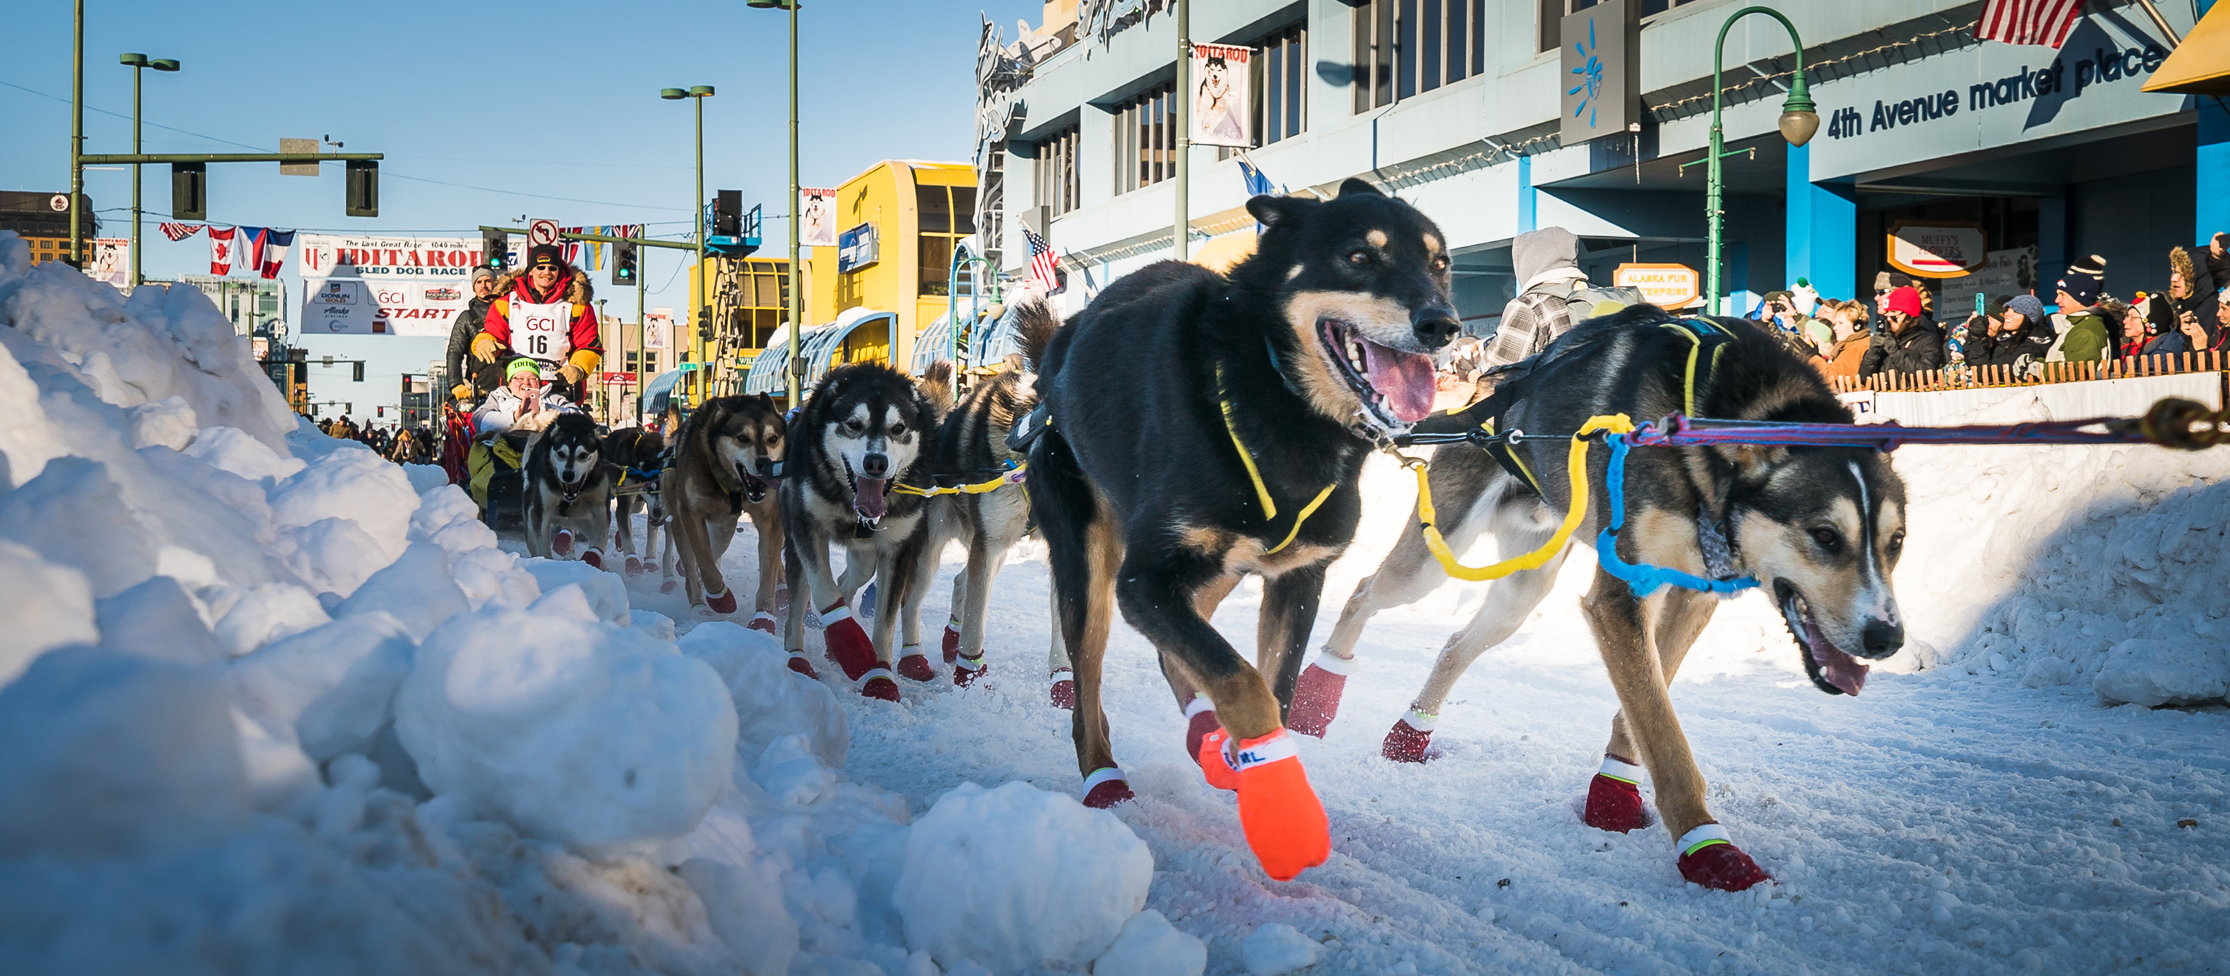 The best time to travel to Alaska: the Iditarod dog sled race in Alaska.